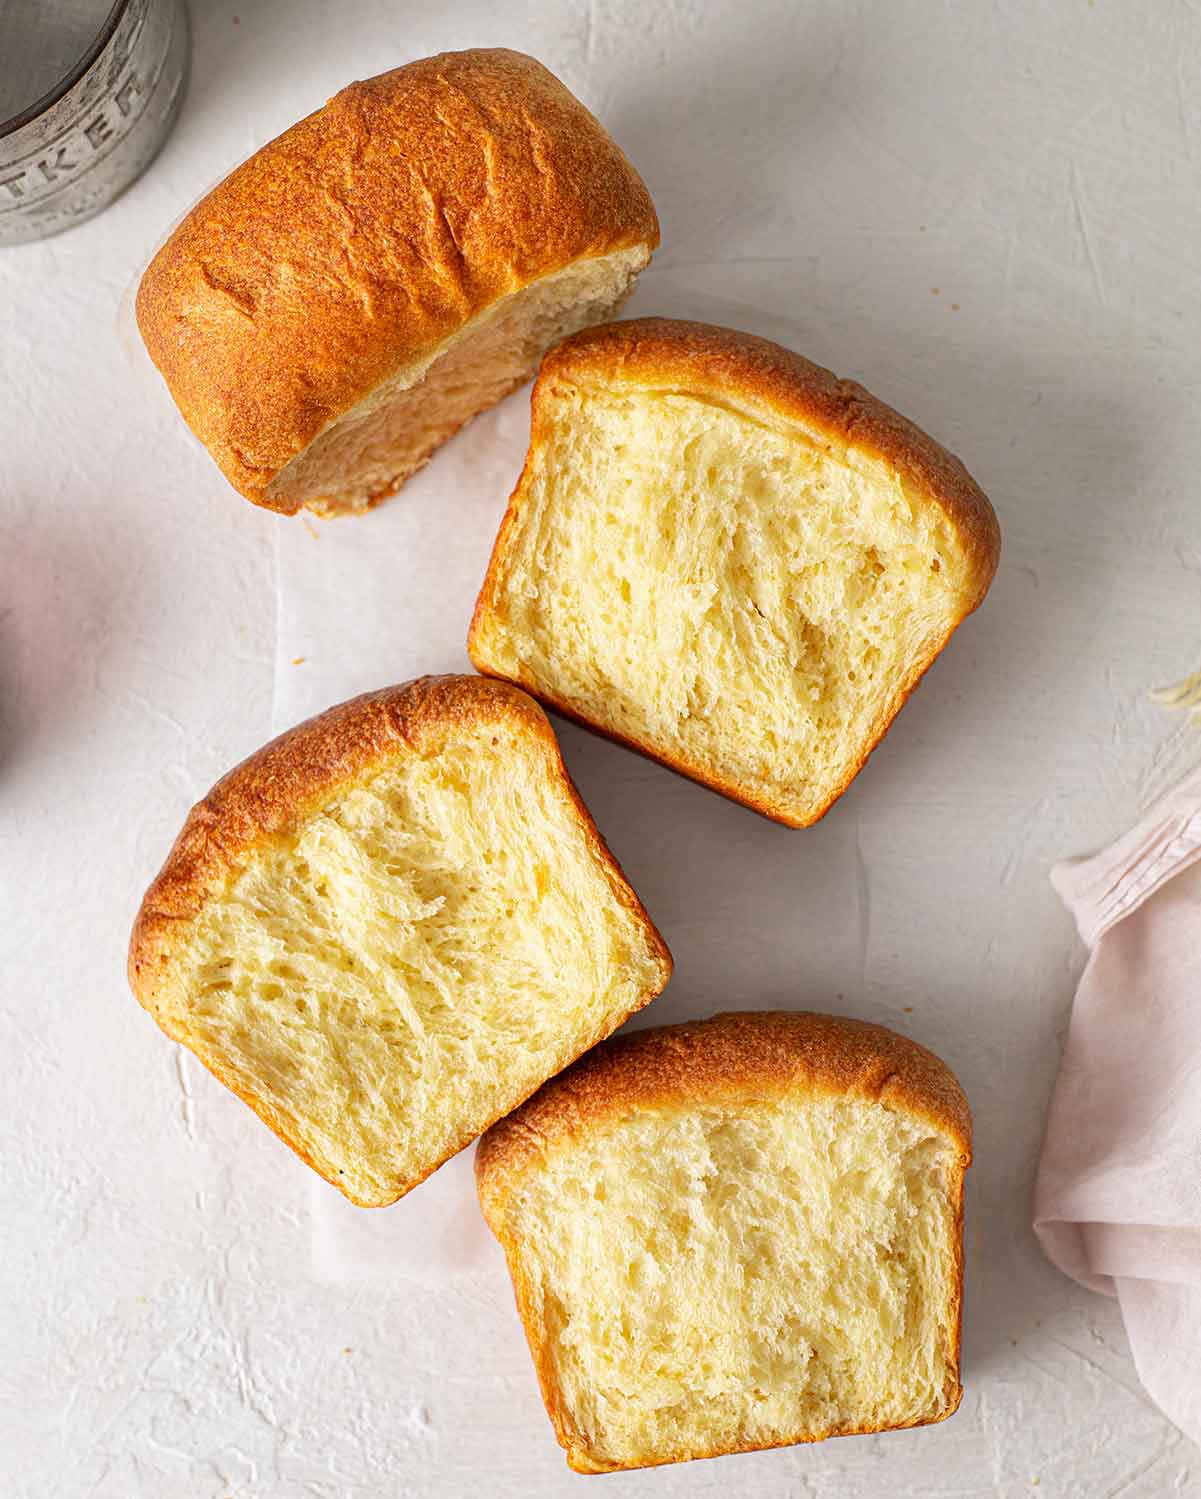 Flatlay of vegan brioche torn into 4 sections revealing fluffy and feathery interior.